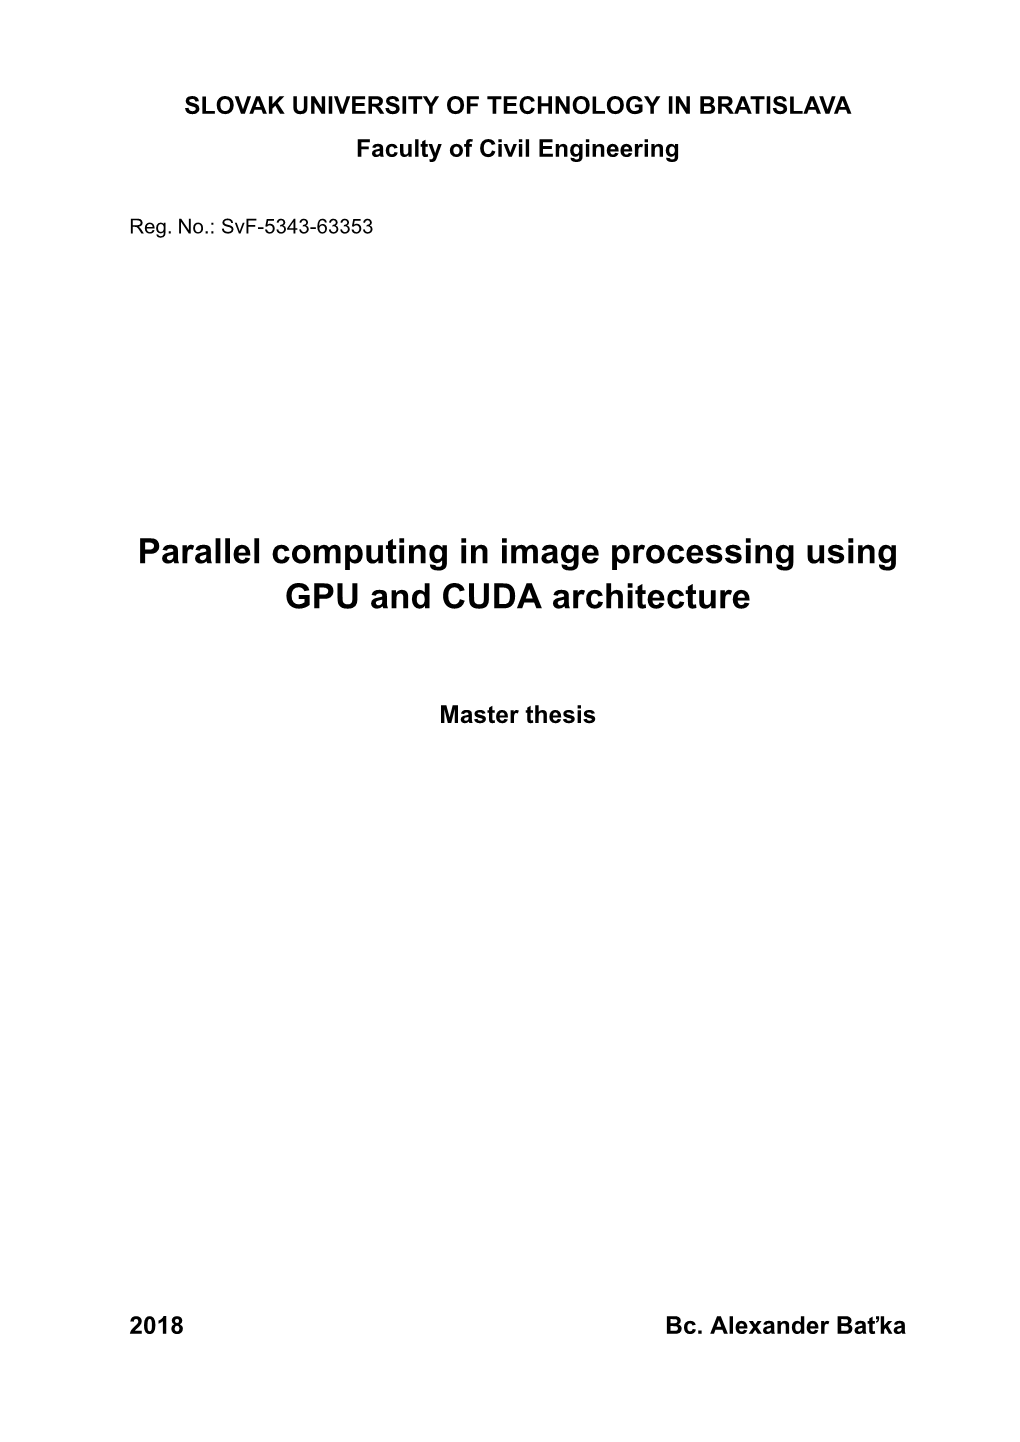 Parallel Computing in Image Processing Using GPU and CUDA Architecture